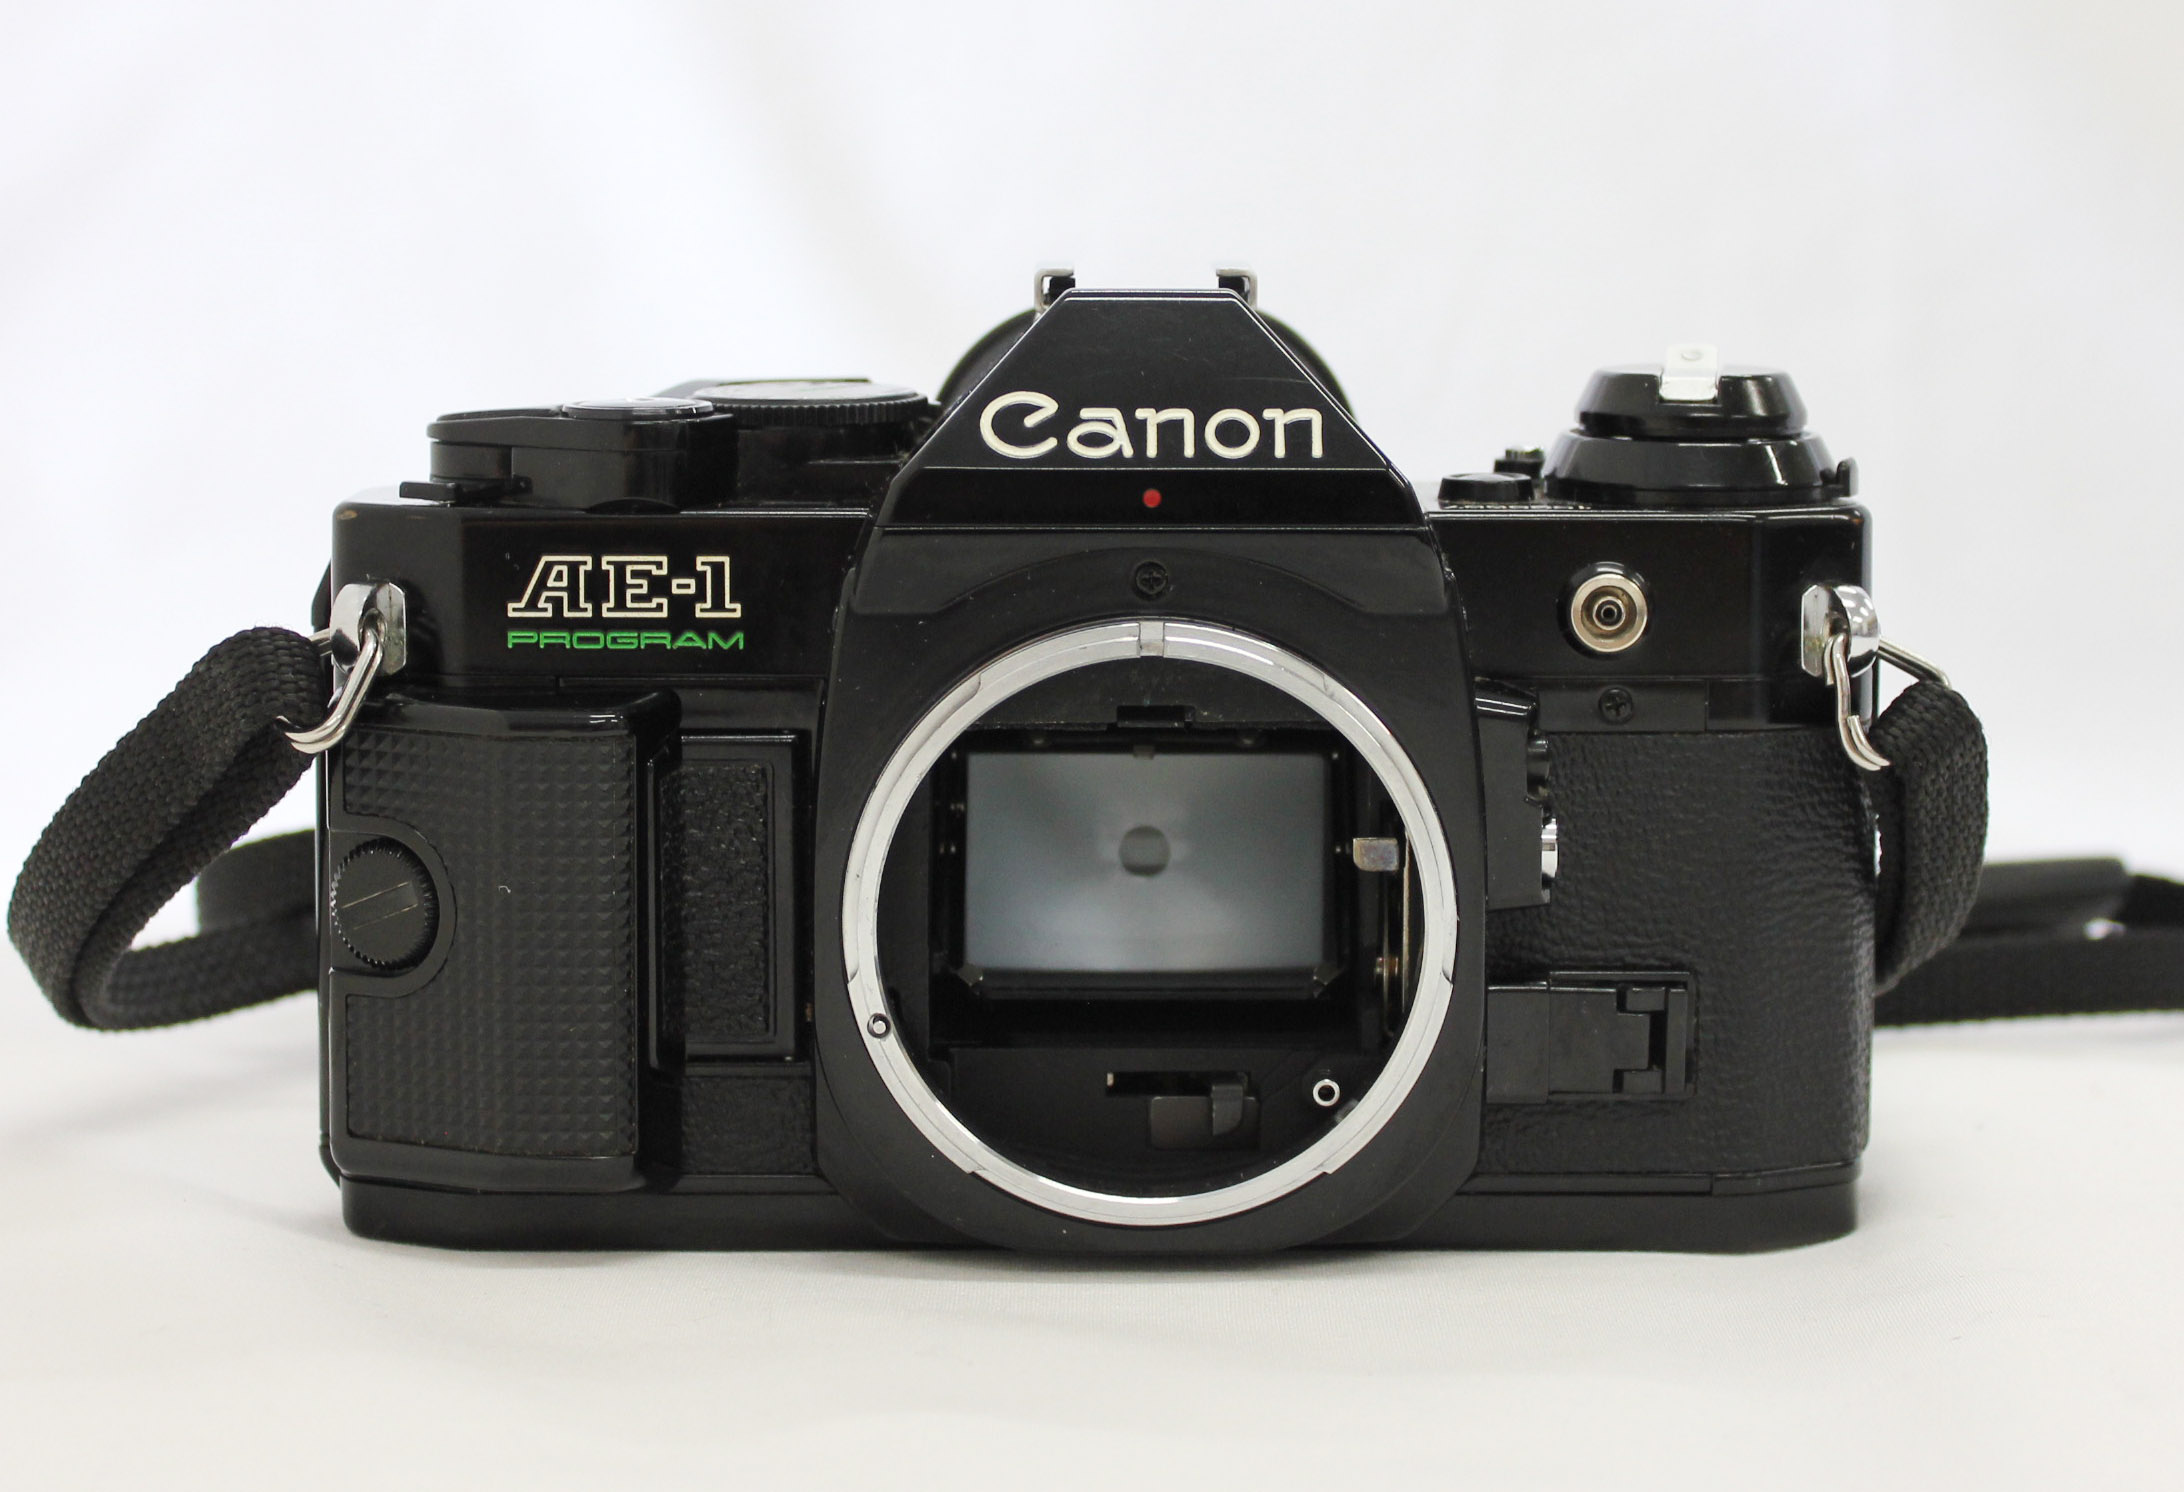 Canon AE-1 Program 35mm SLR Film Camera Black with New FD 35-70mm F/4 Lens from Japan (C1817 